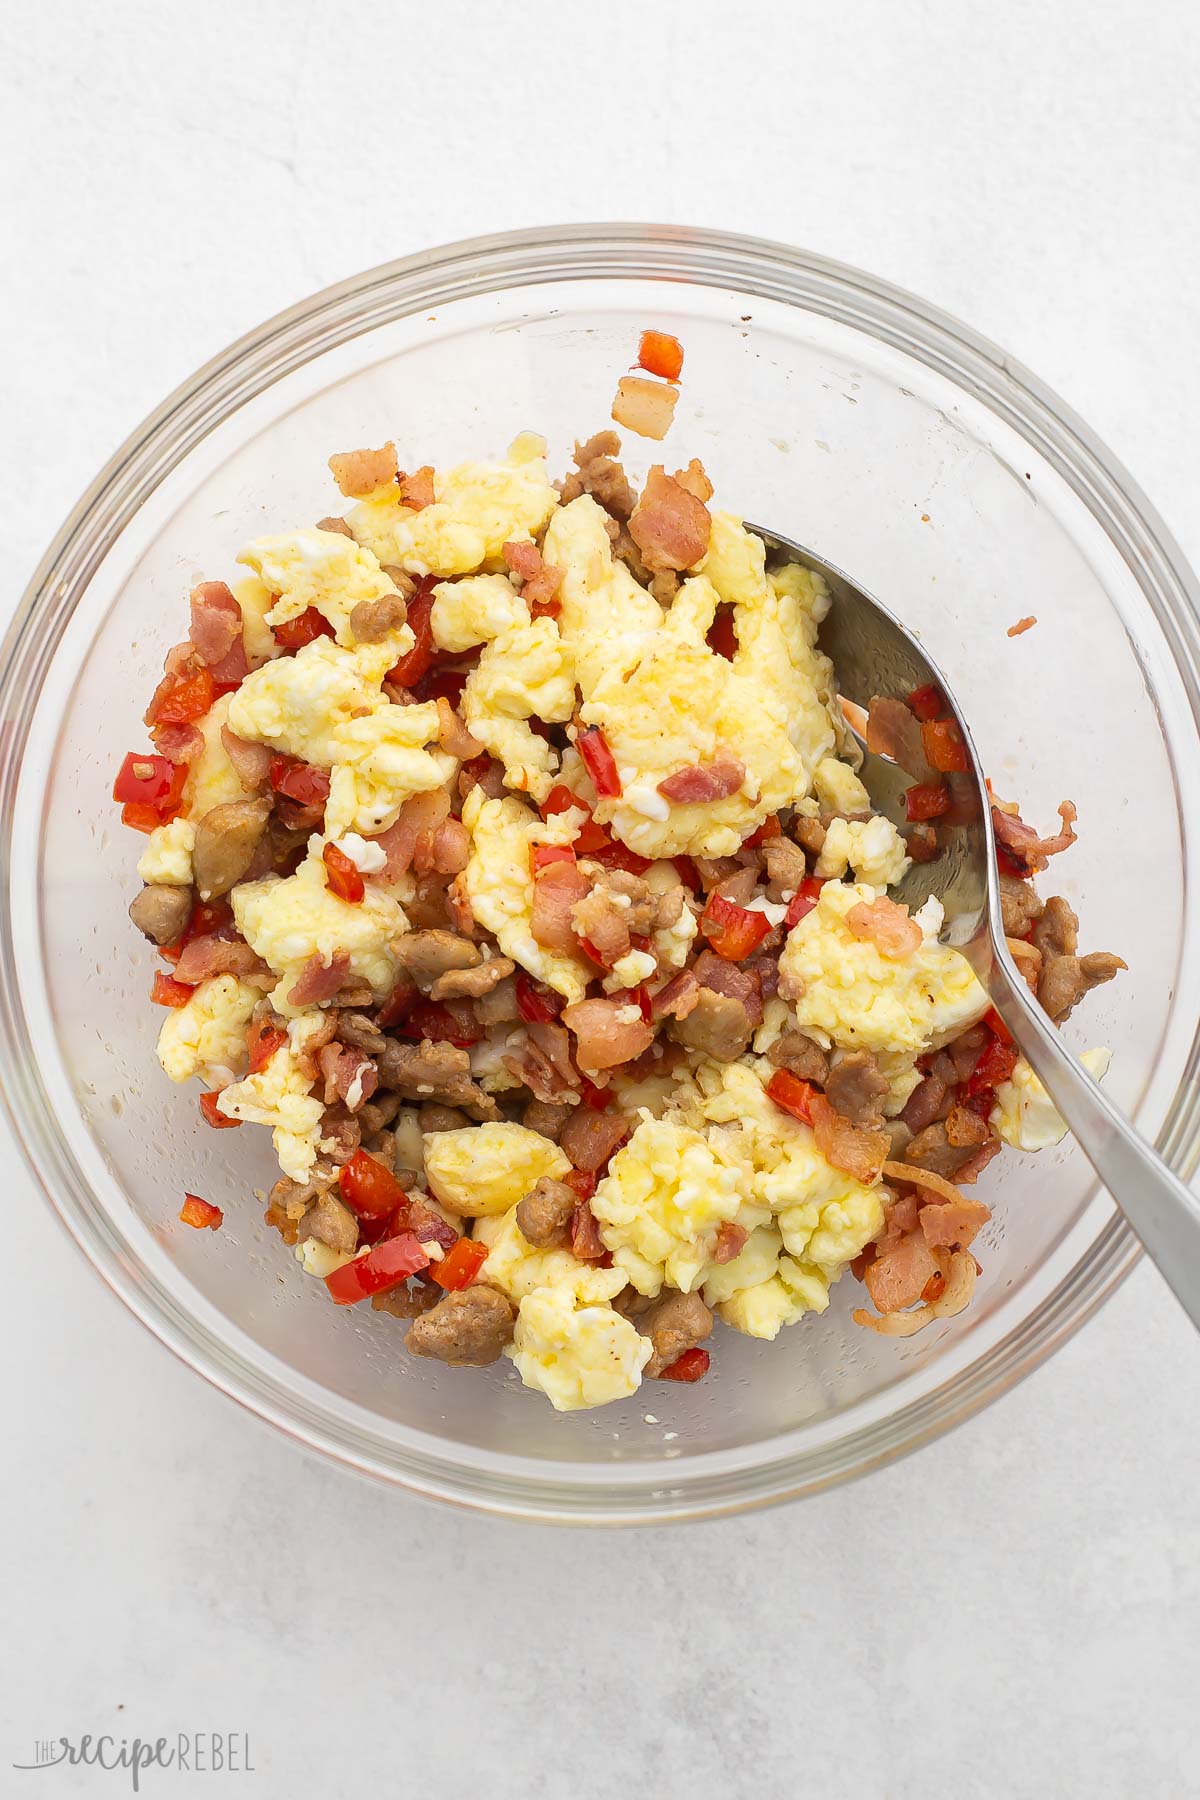 Top view of glass mixing bowl with cooked ground beef, diced pepper, and scrambled eggs in it.  